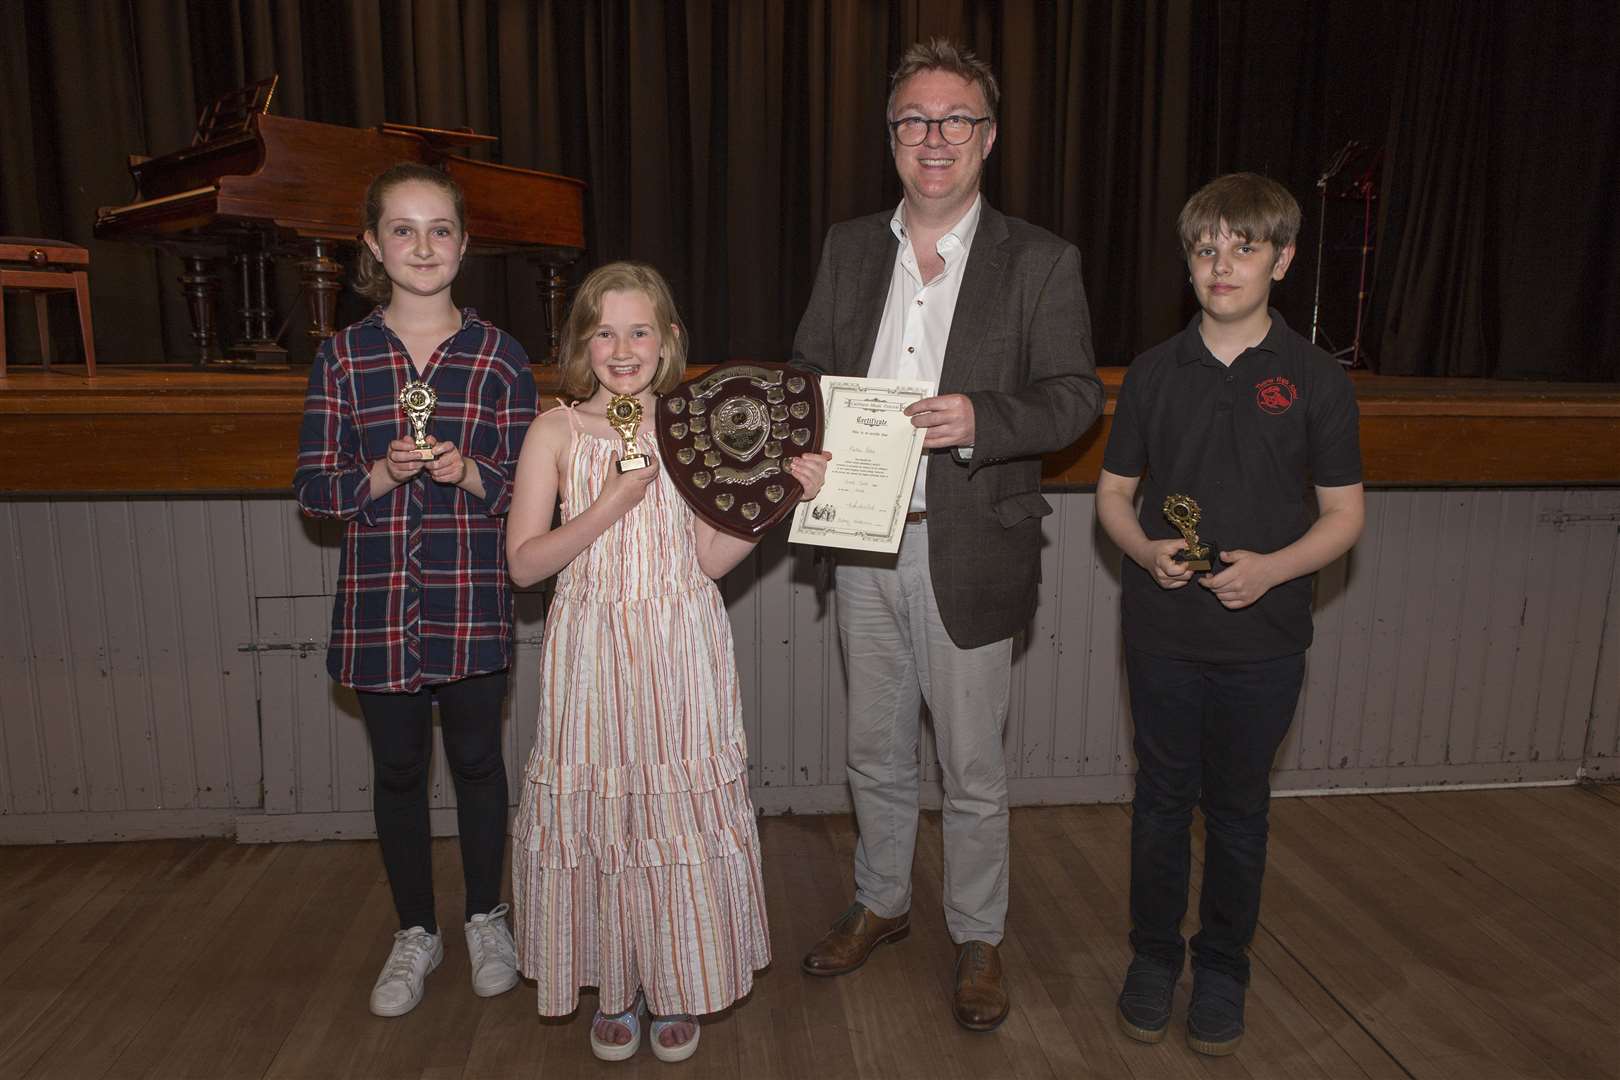 Martha Potts, of Mount Pleasant, won the Henry Rosie Memorial Shield in the vocal solo final on Friday night. She received the trophy from adjudicator Richard Yarr, alongside other finalists Ola Omand and Charles Fryett, both Thurso High School. Picture: Robert MacDonald / Northern Studios